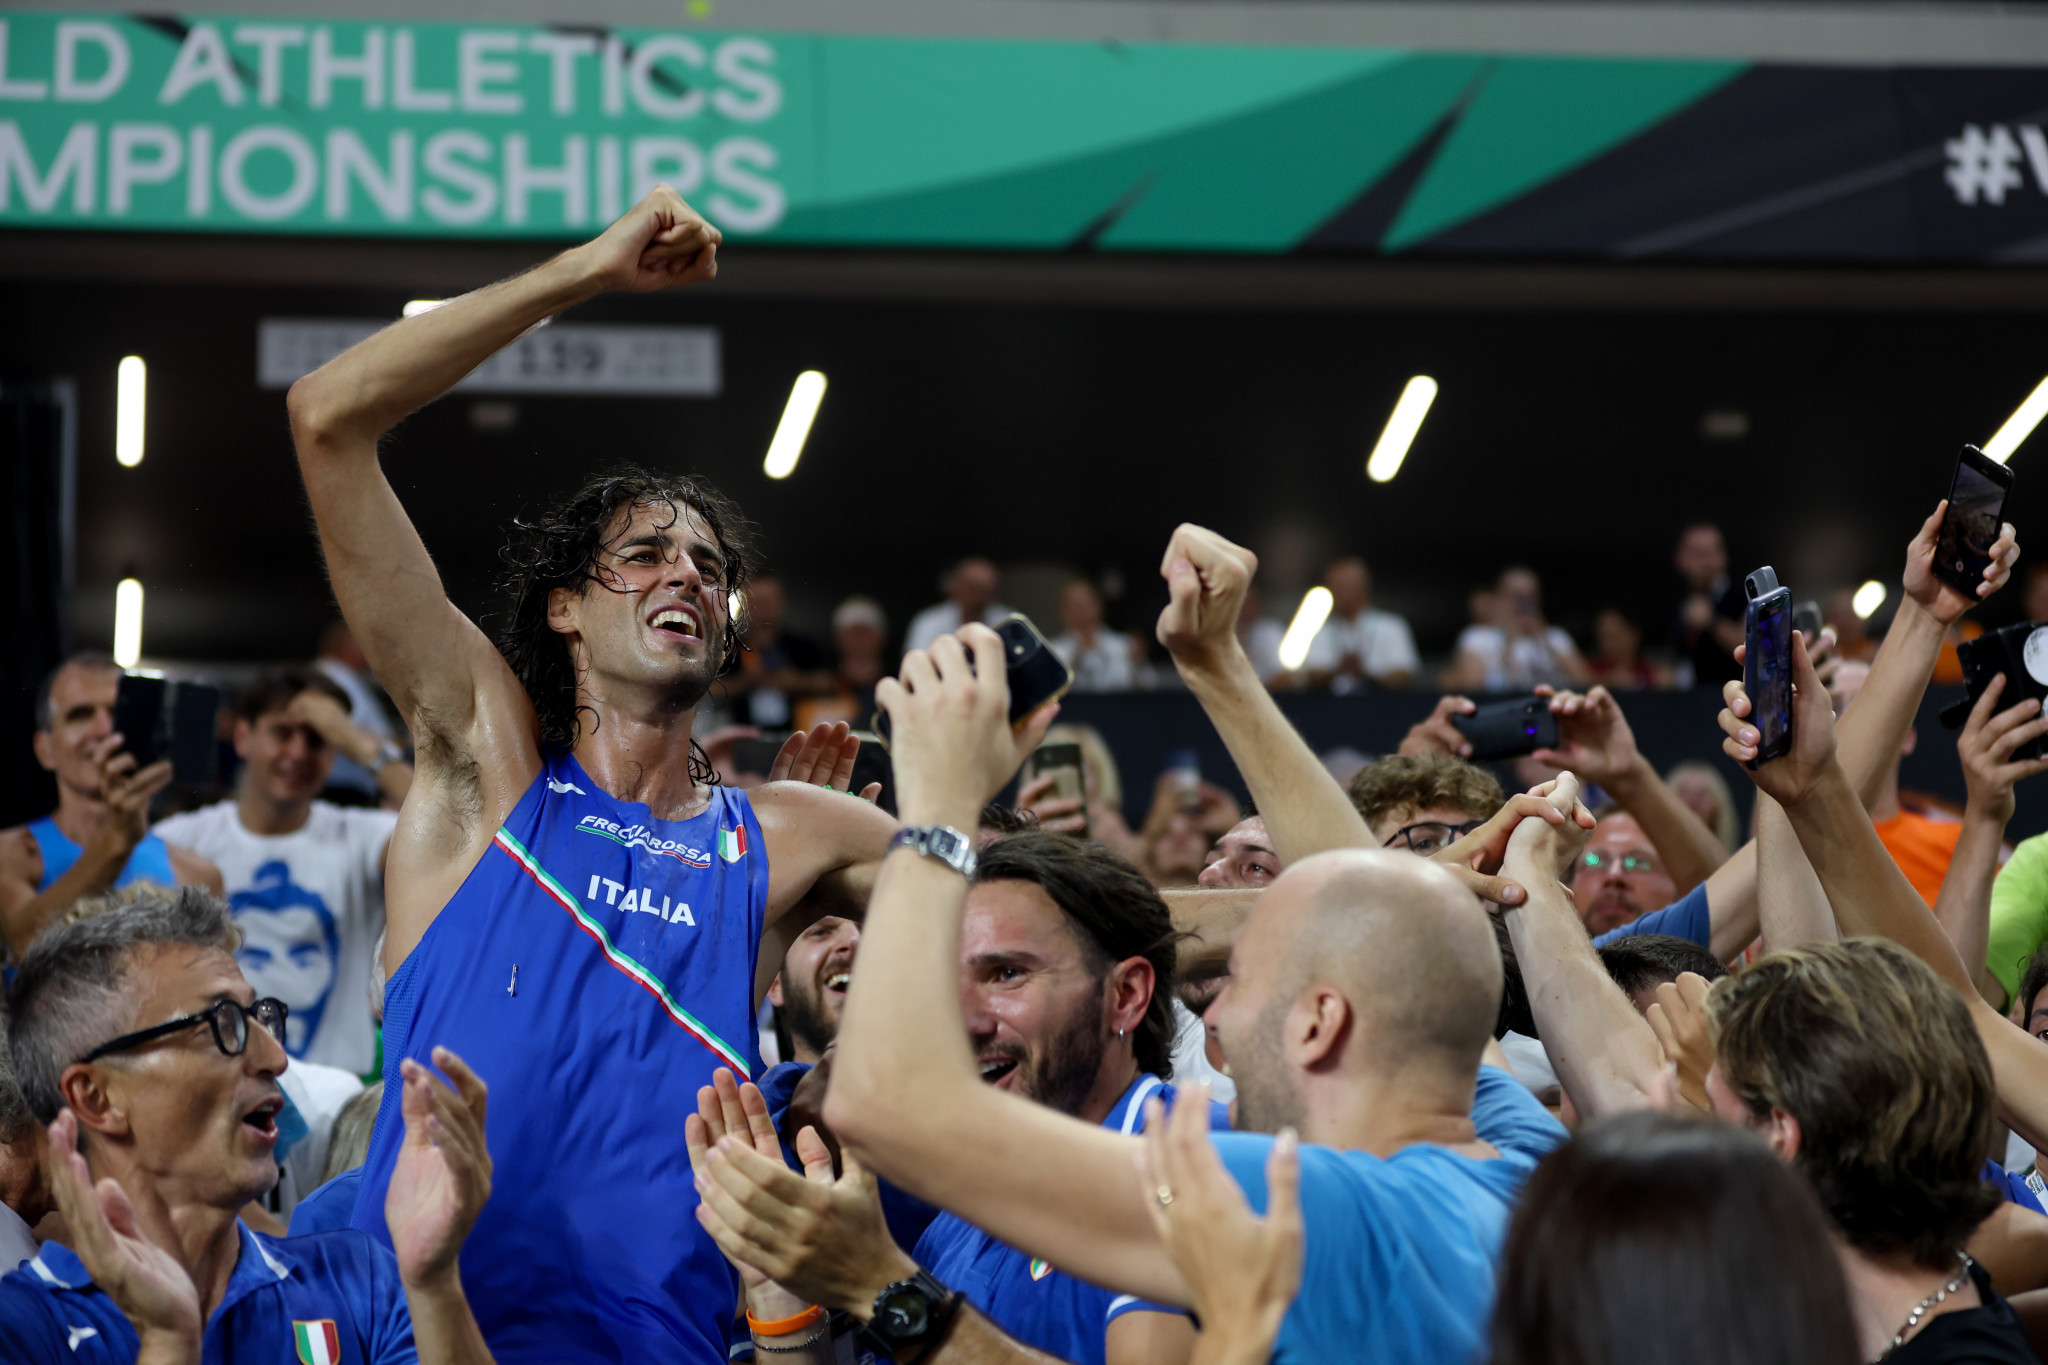 Gianmarco Tamberi of Italy, left, enjoyed vocal support throughout the men's high jump competition in Budapest ©Getty Images